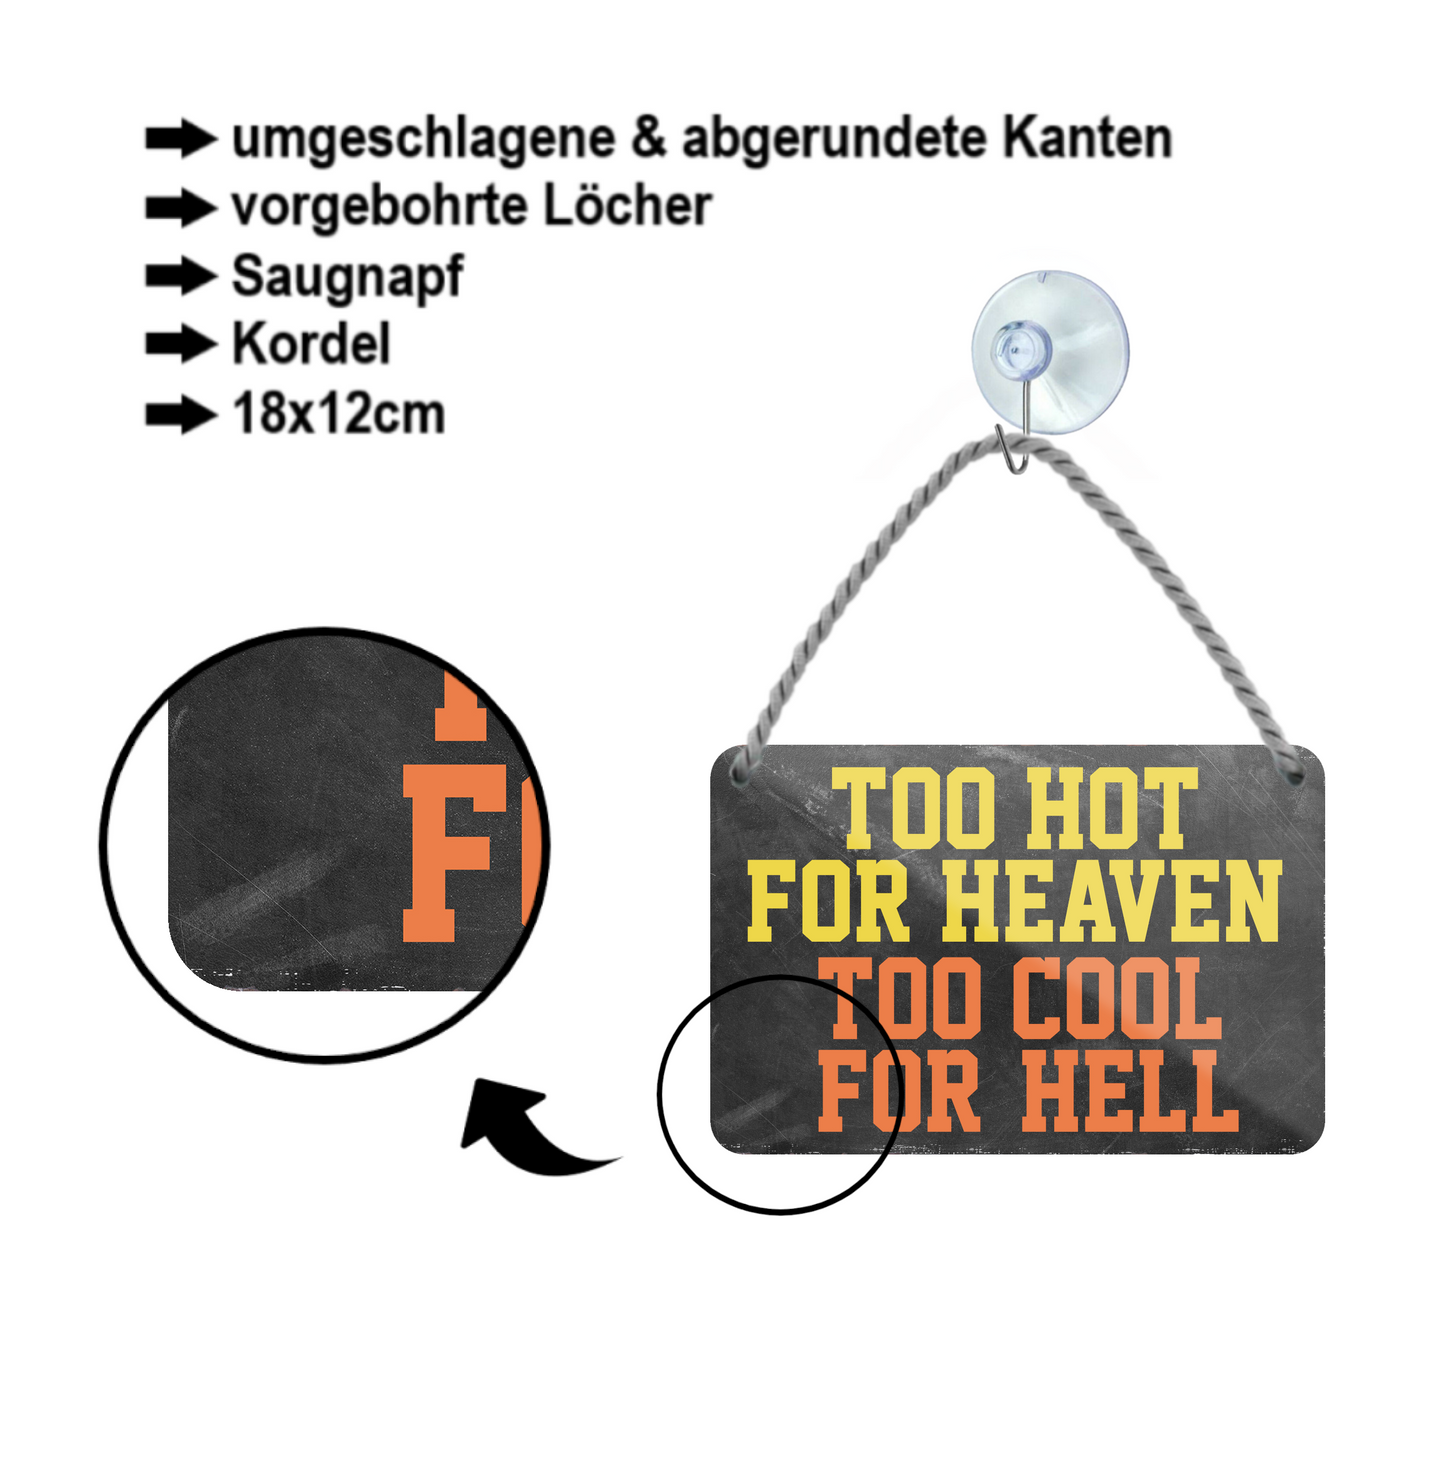 Blechschild ''Too hot for heaven too cool for hell'' 18x12cm